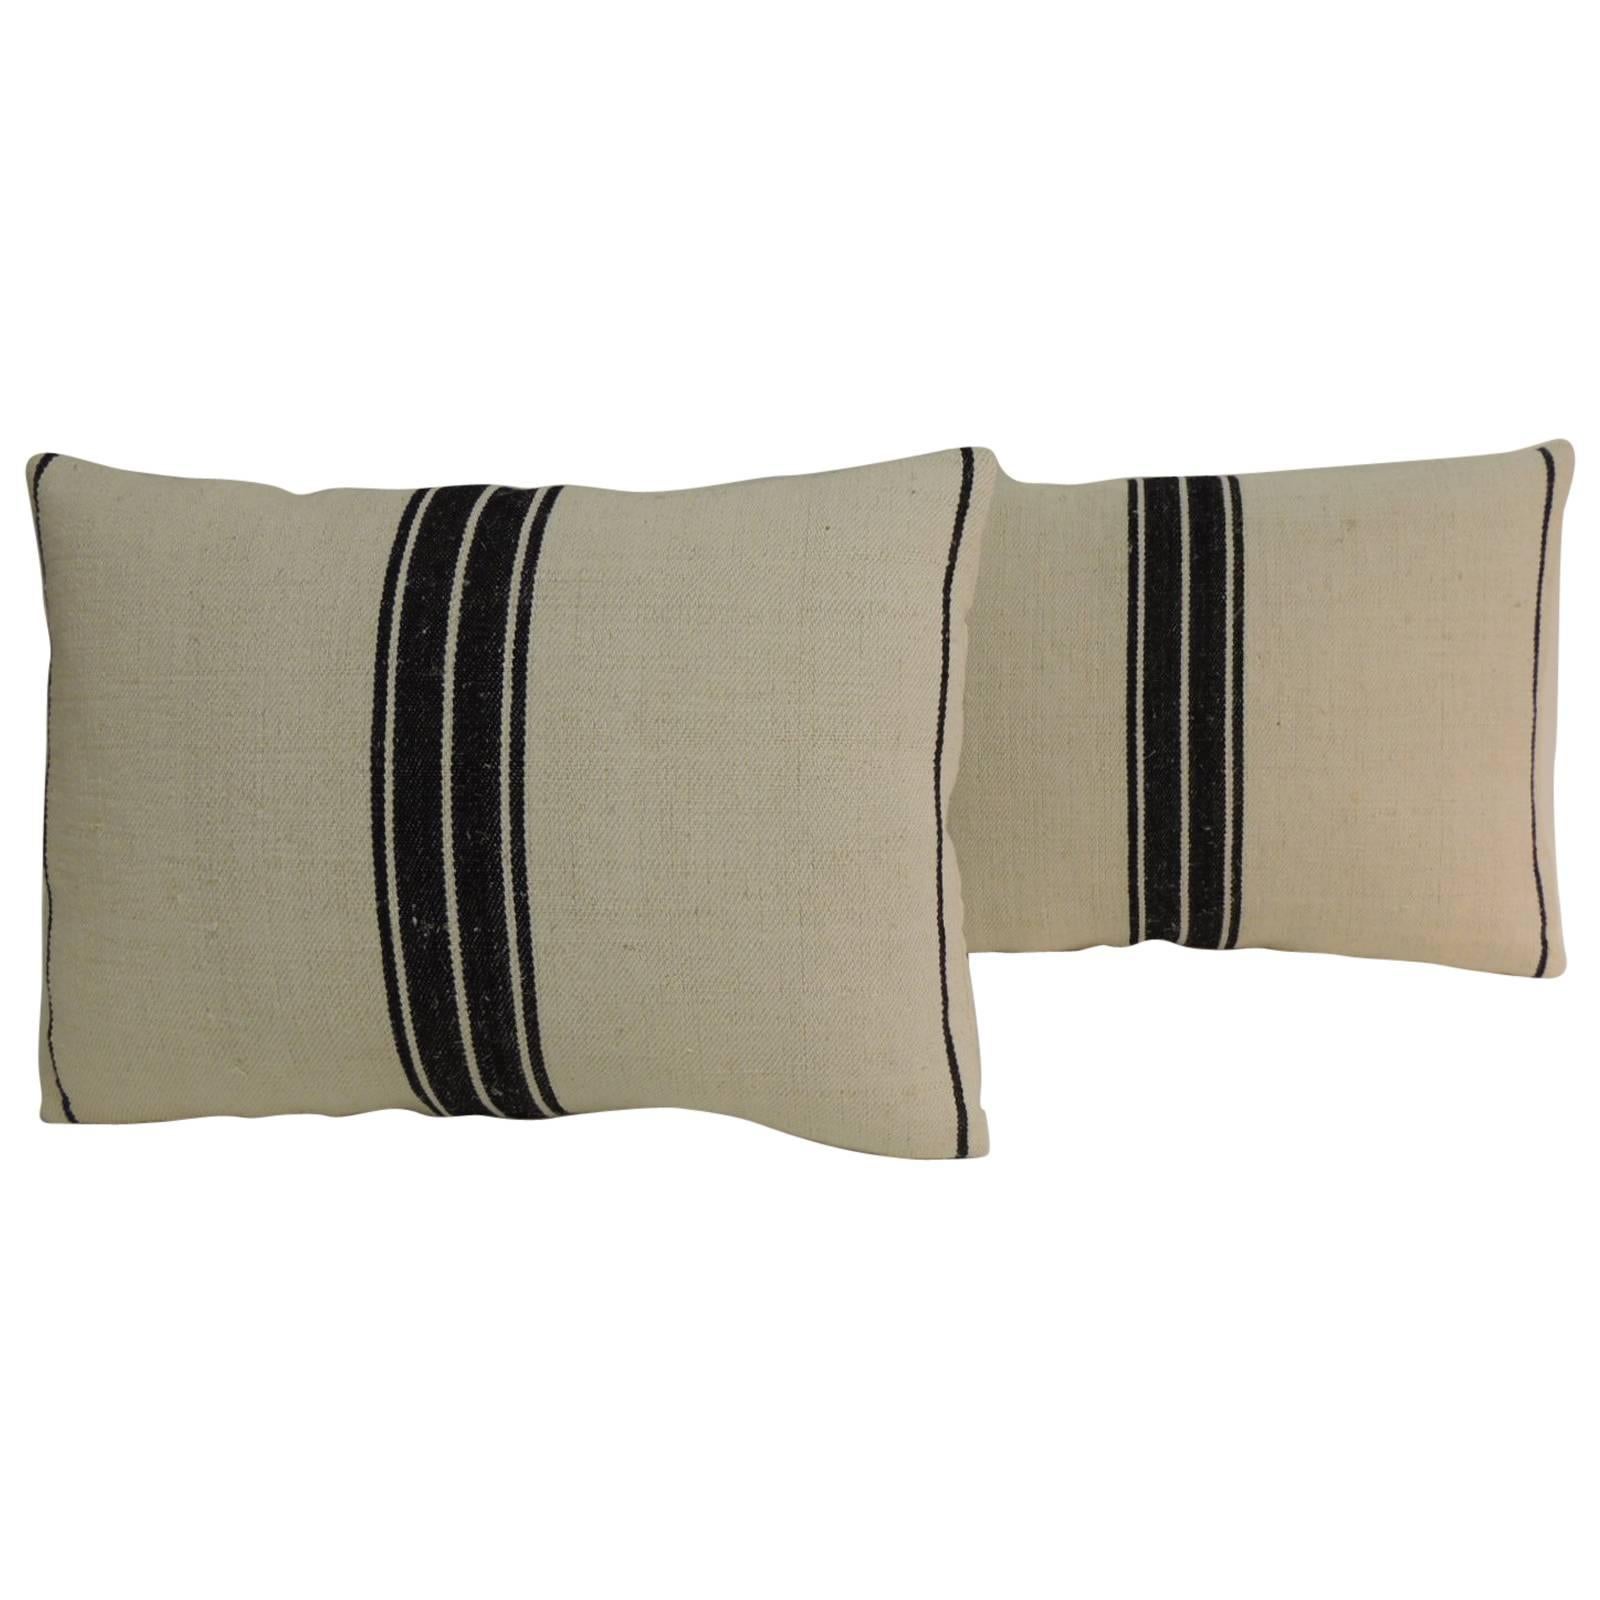 Pair of French Black & Natural Woven Grain Sack Stripes Decorative Pillows